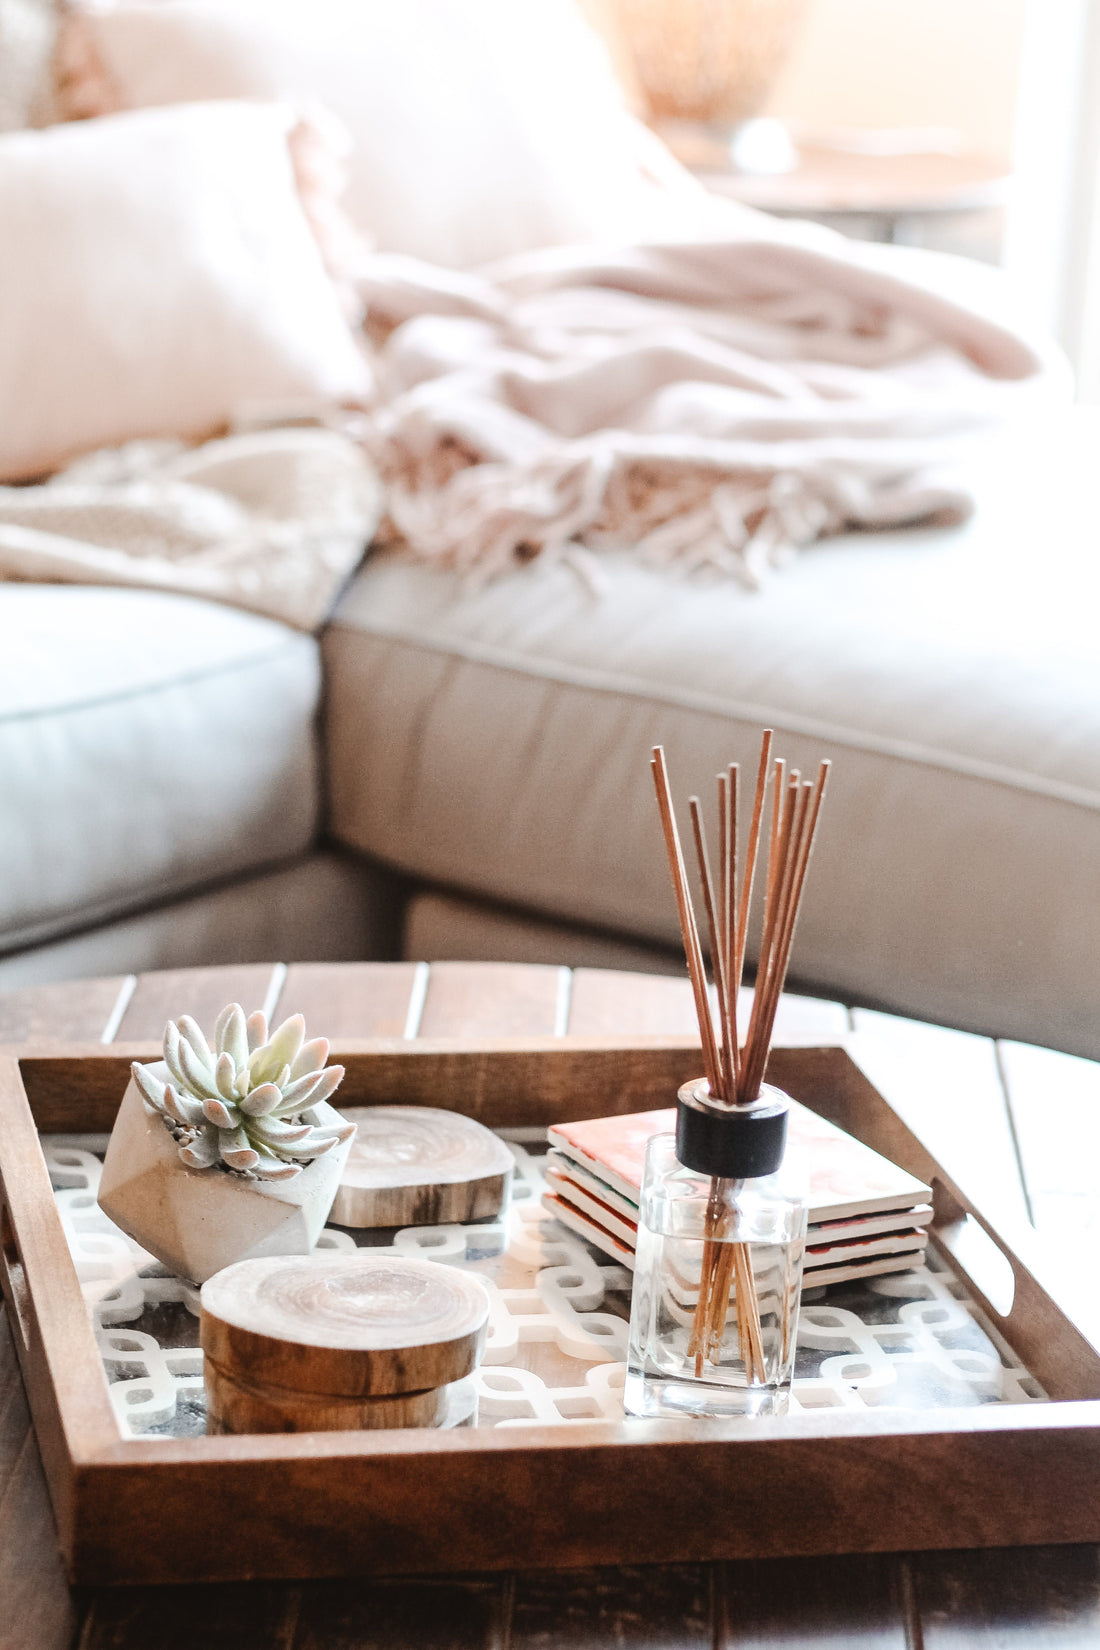 Create a refreshing ambiance at home with our reed diffusers